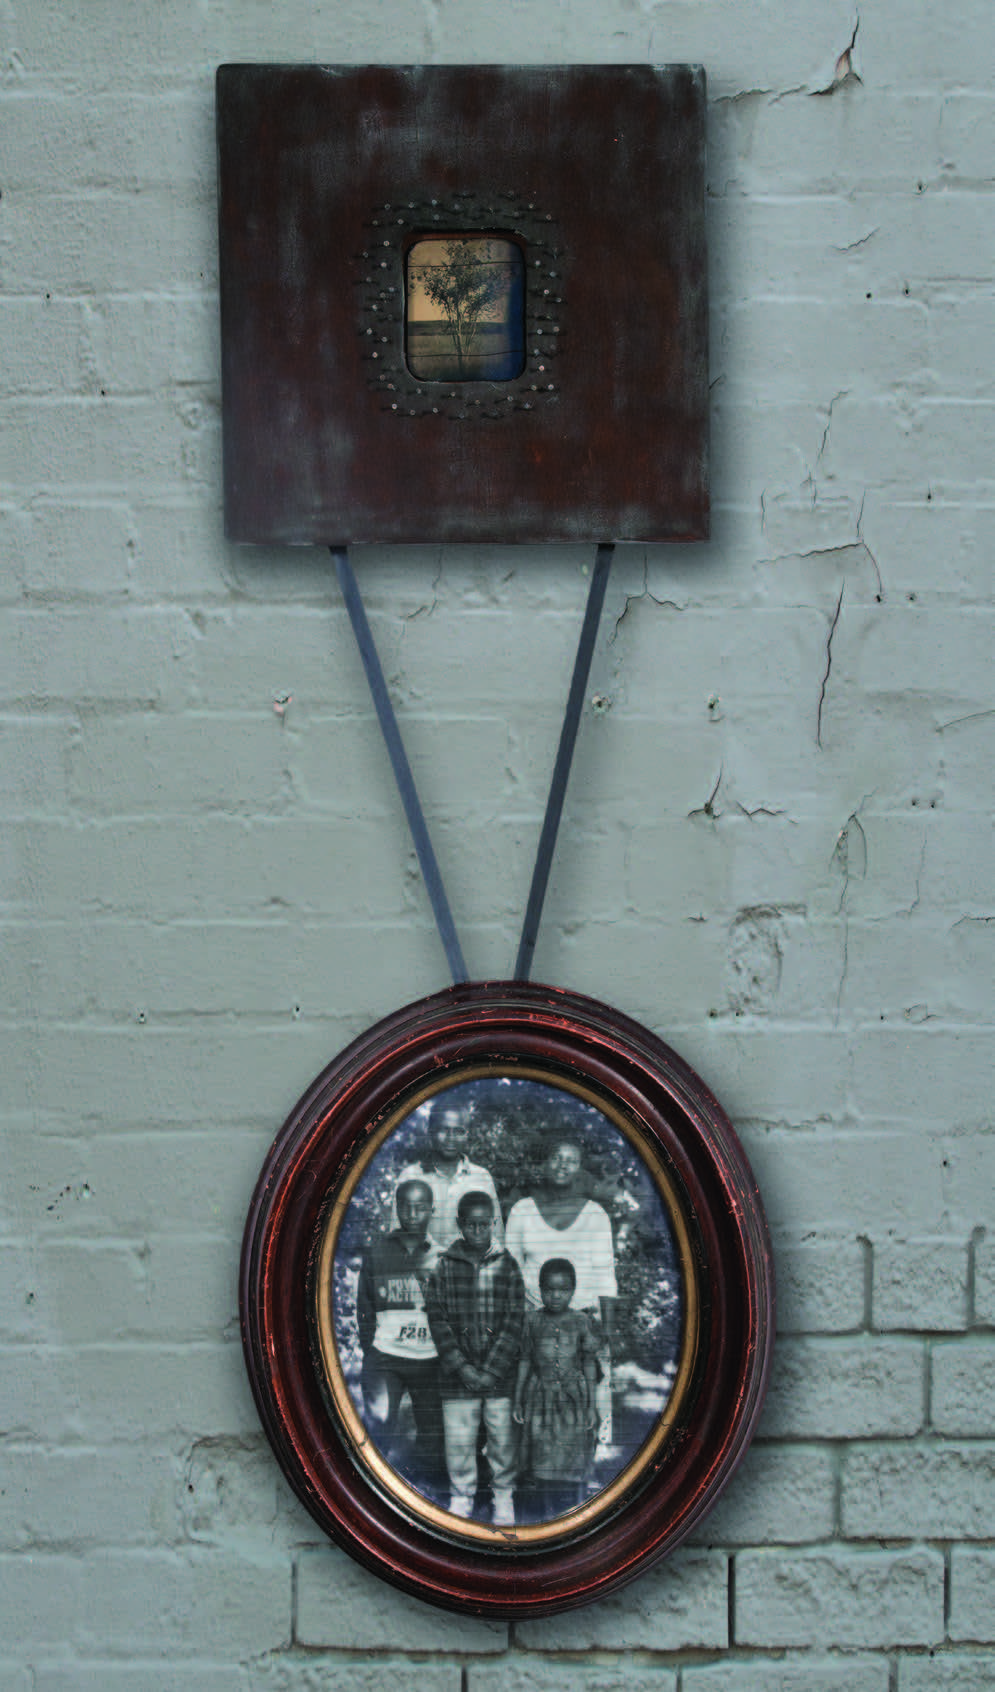 Ian van Coller, Joseph, 2002. Modern ambrotype and pigment print with vintage frame, wood, and oil (2002.14.1).